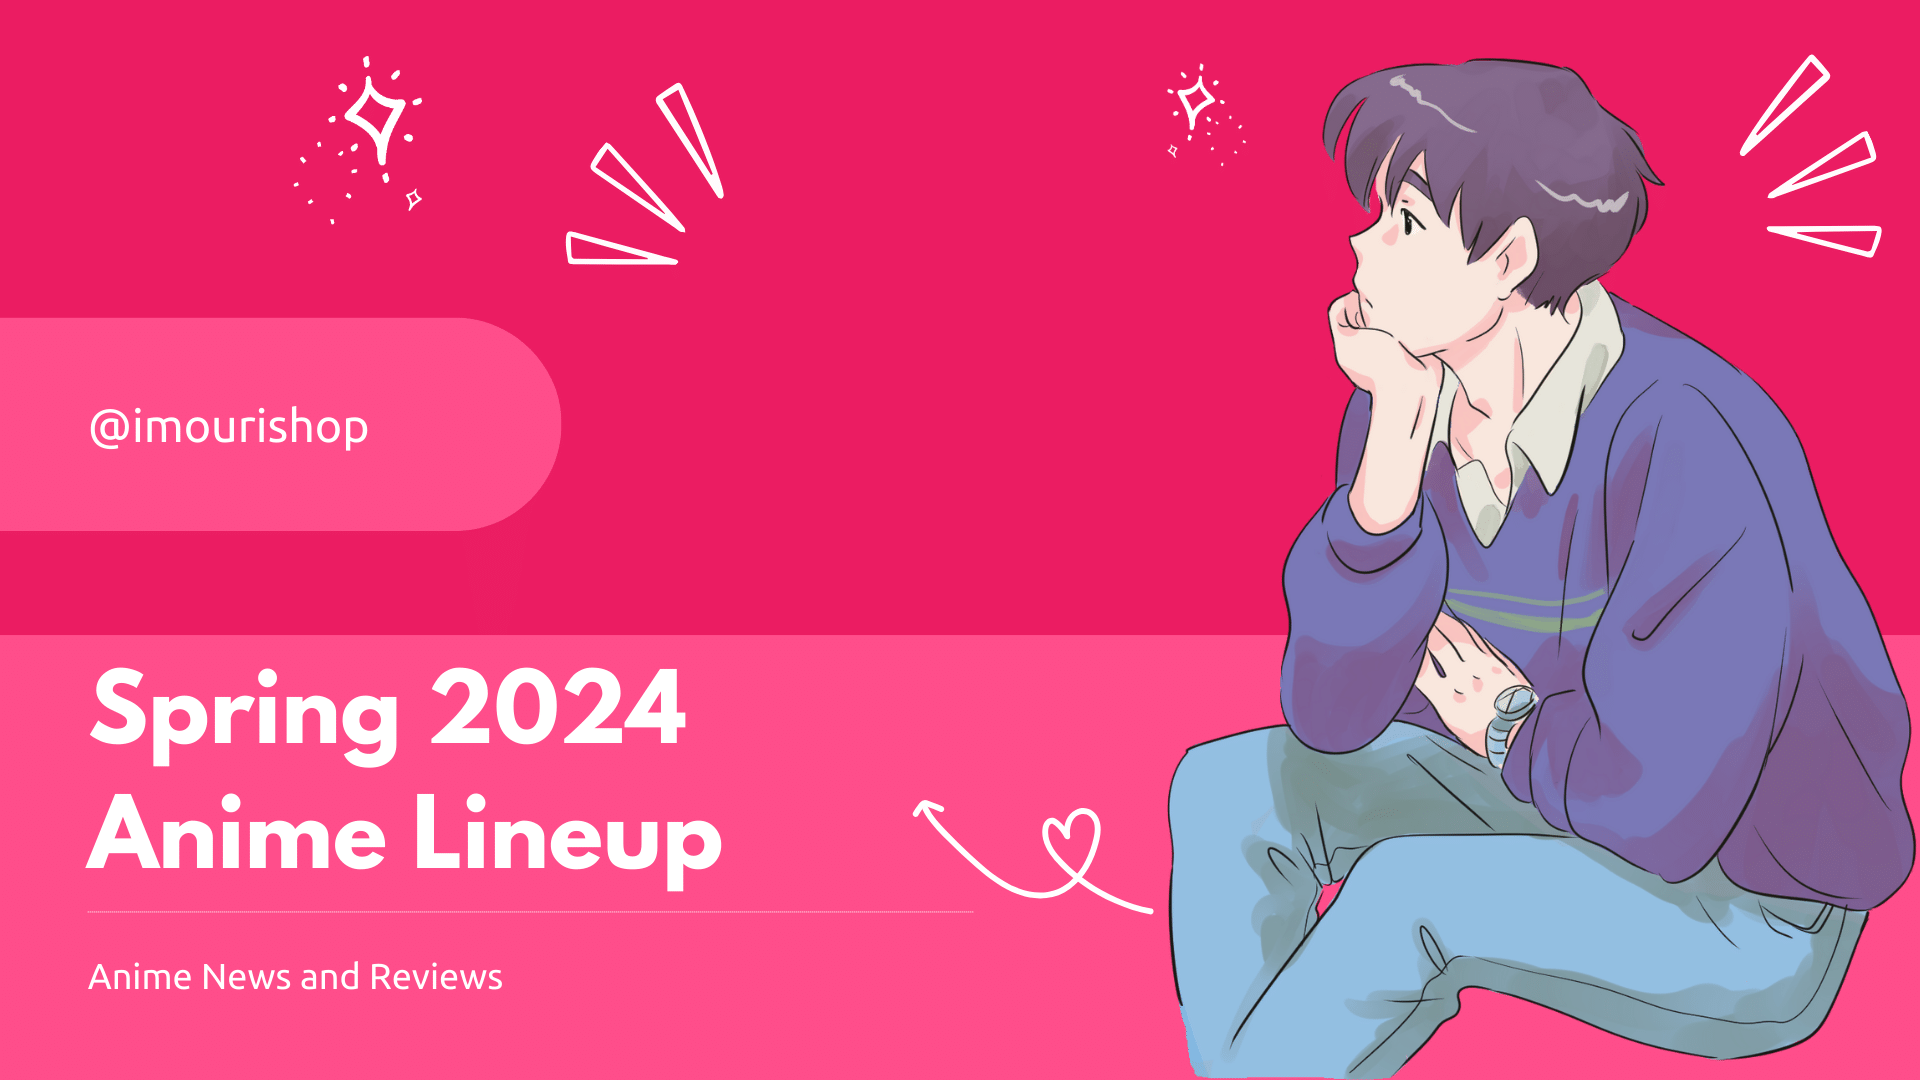 An illustrated promotional image for the Spring 2024 Anime Lineup featuring an anime character sitting pensively with a backdrop of a vibrant pink background malongside text Spring 2024 Anime Lineup imourishop and additional text Anime News and Reviews